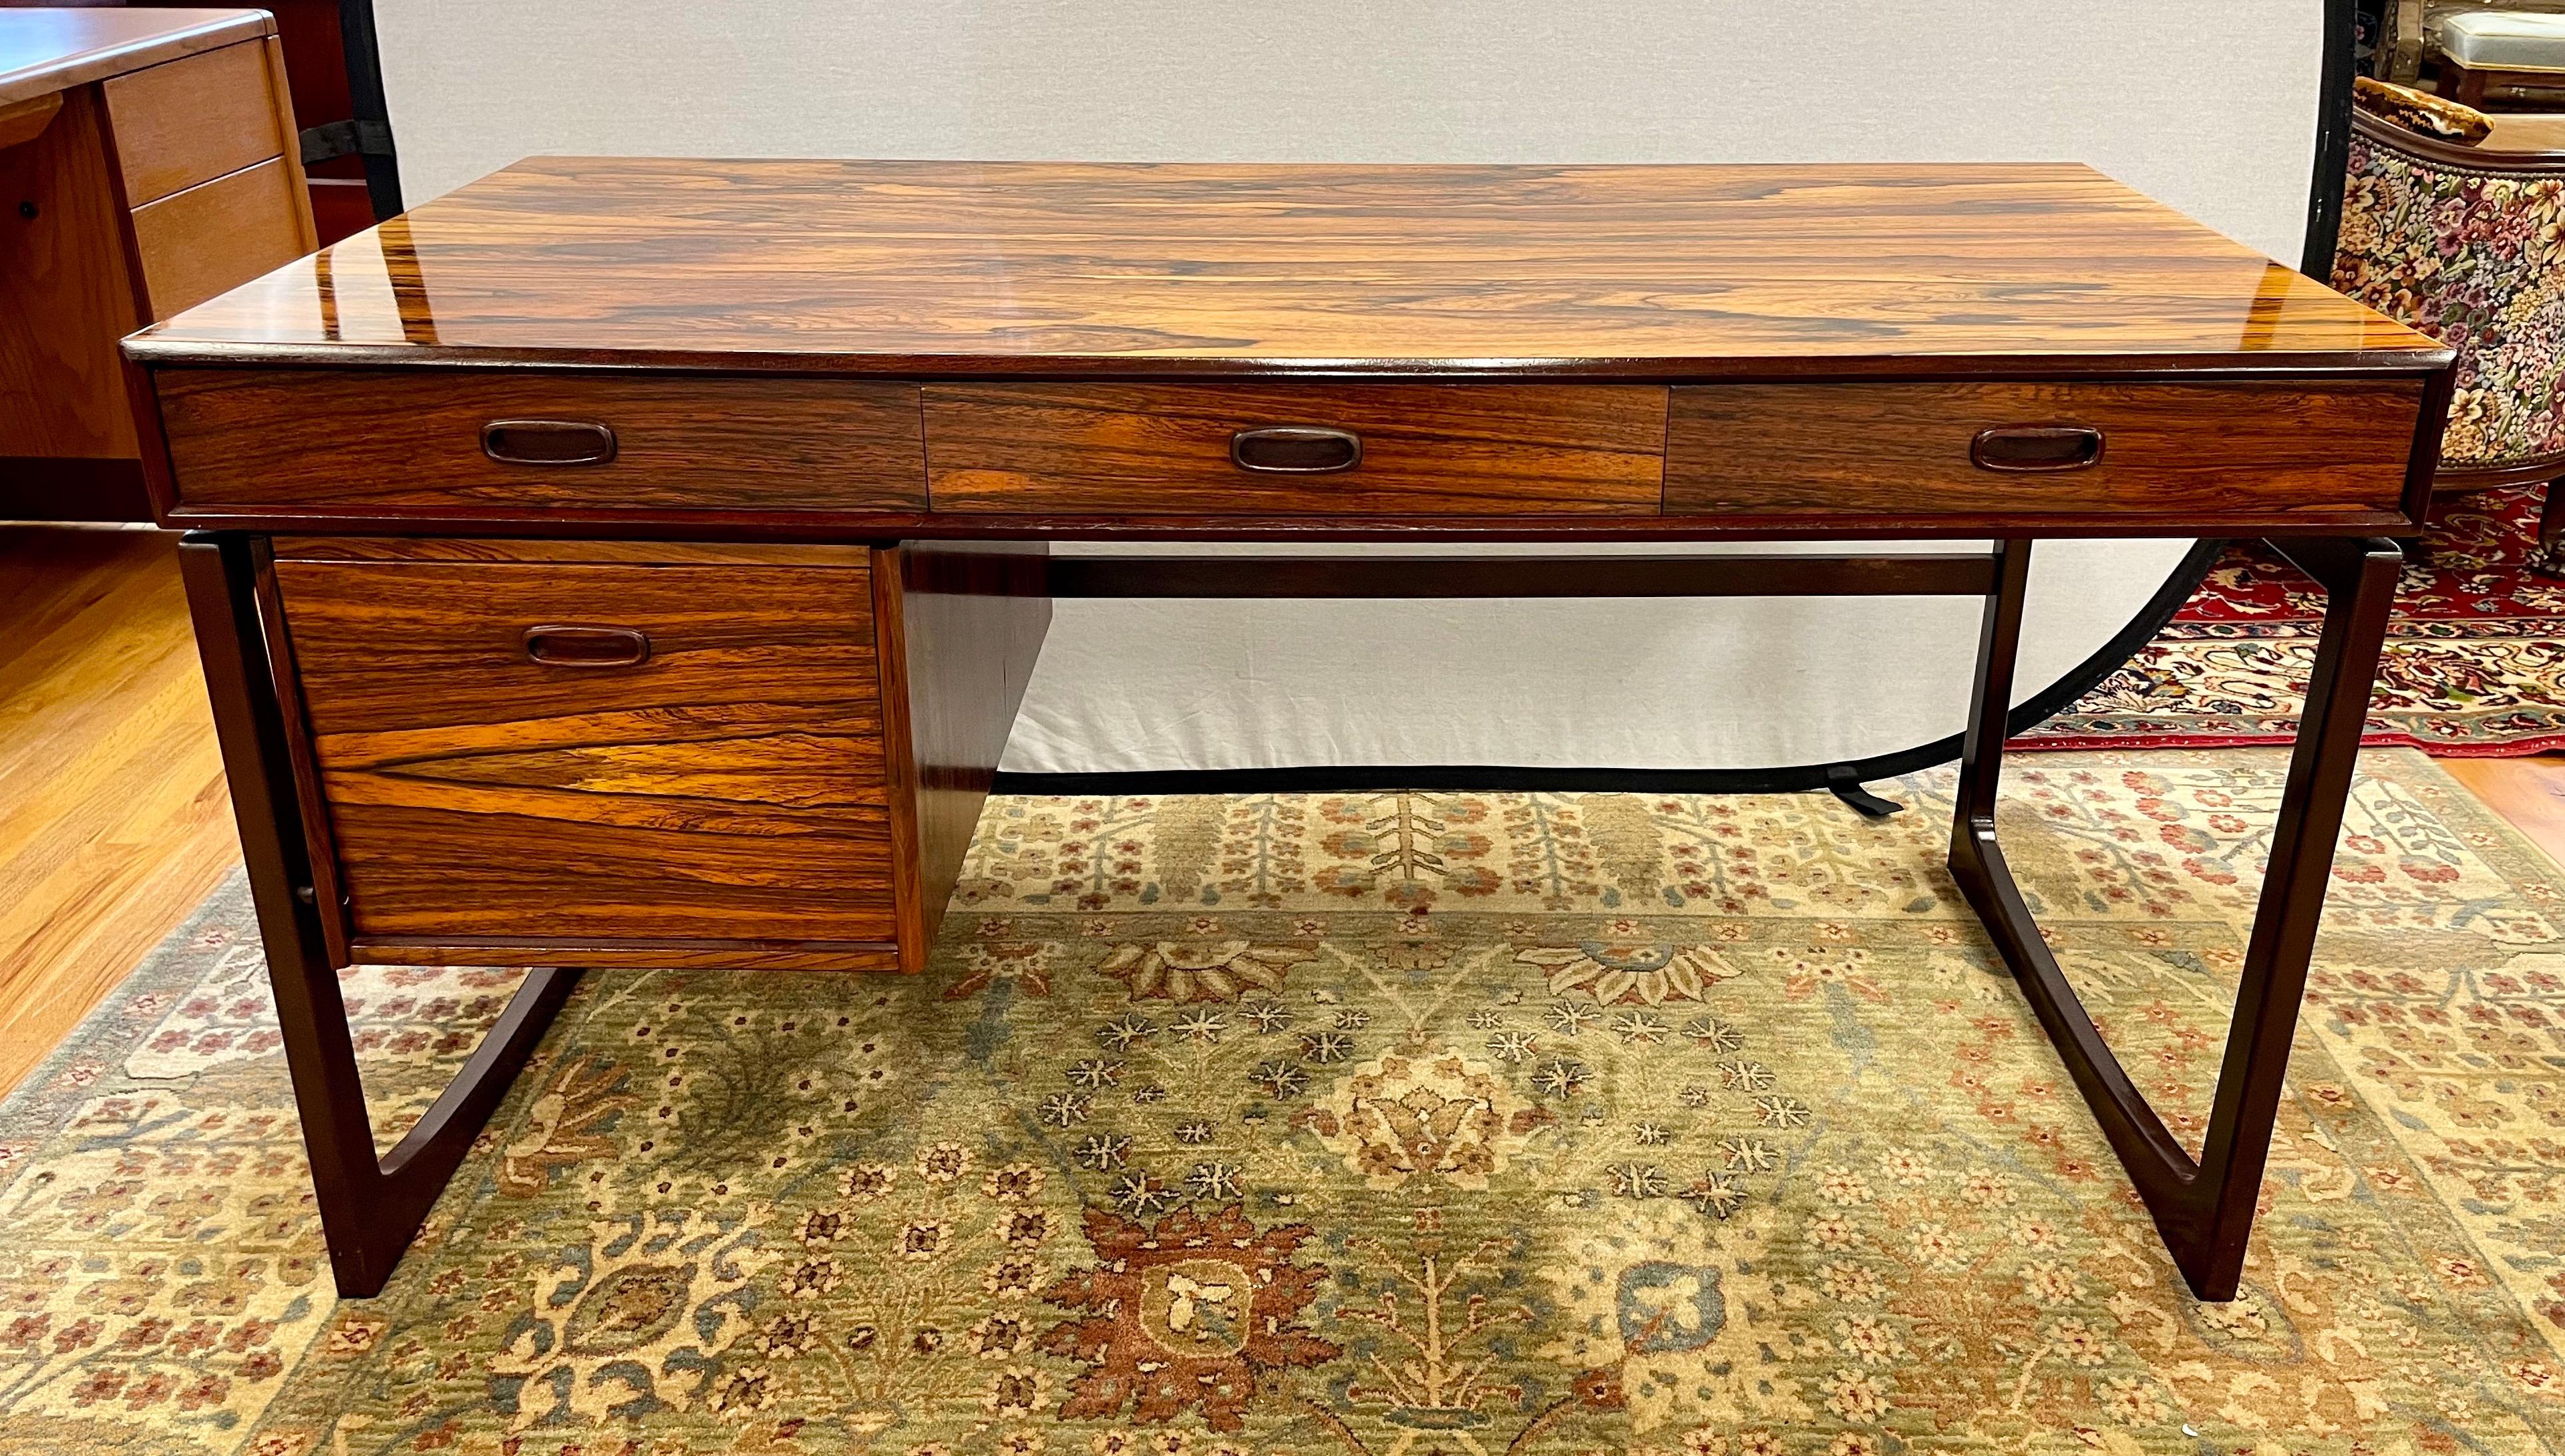 Stunning Danish Modern floating rosewood desk with three drawers at top and one bottom left drawer. The kneehole dimensions are 3 ft wide by 2 ft tall which gives plenty of room for any body type. The graining on the rosewood is sensational and has